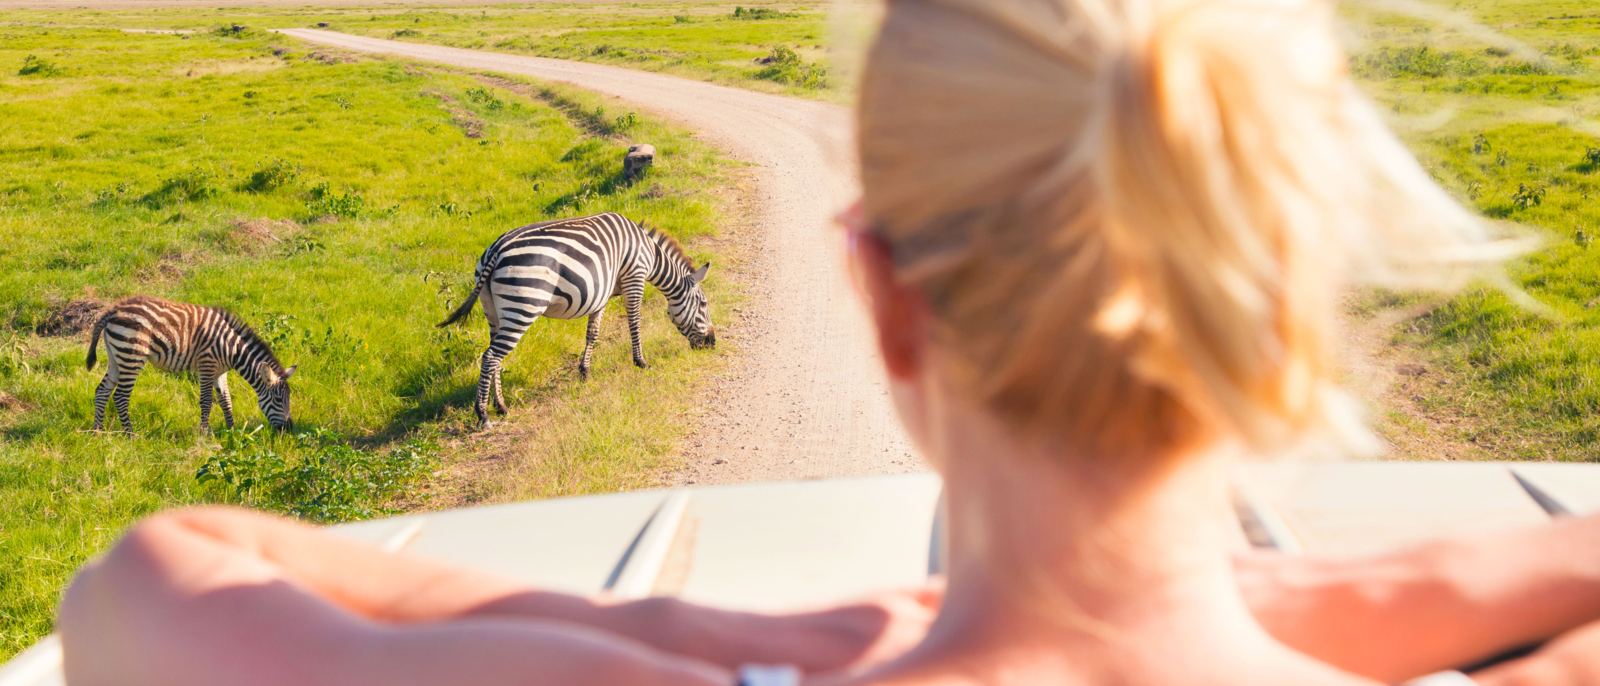 01 Woman on african wildlife safari observing zebras from open roof safari jeep. Rear view. Focus on zebra